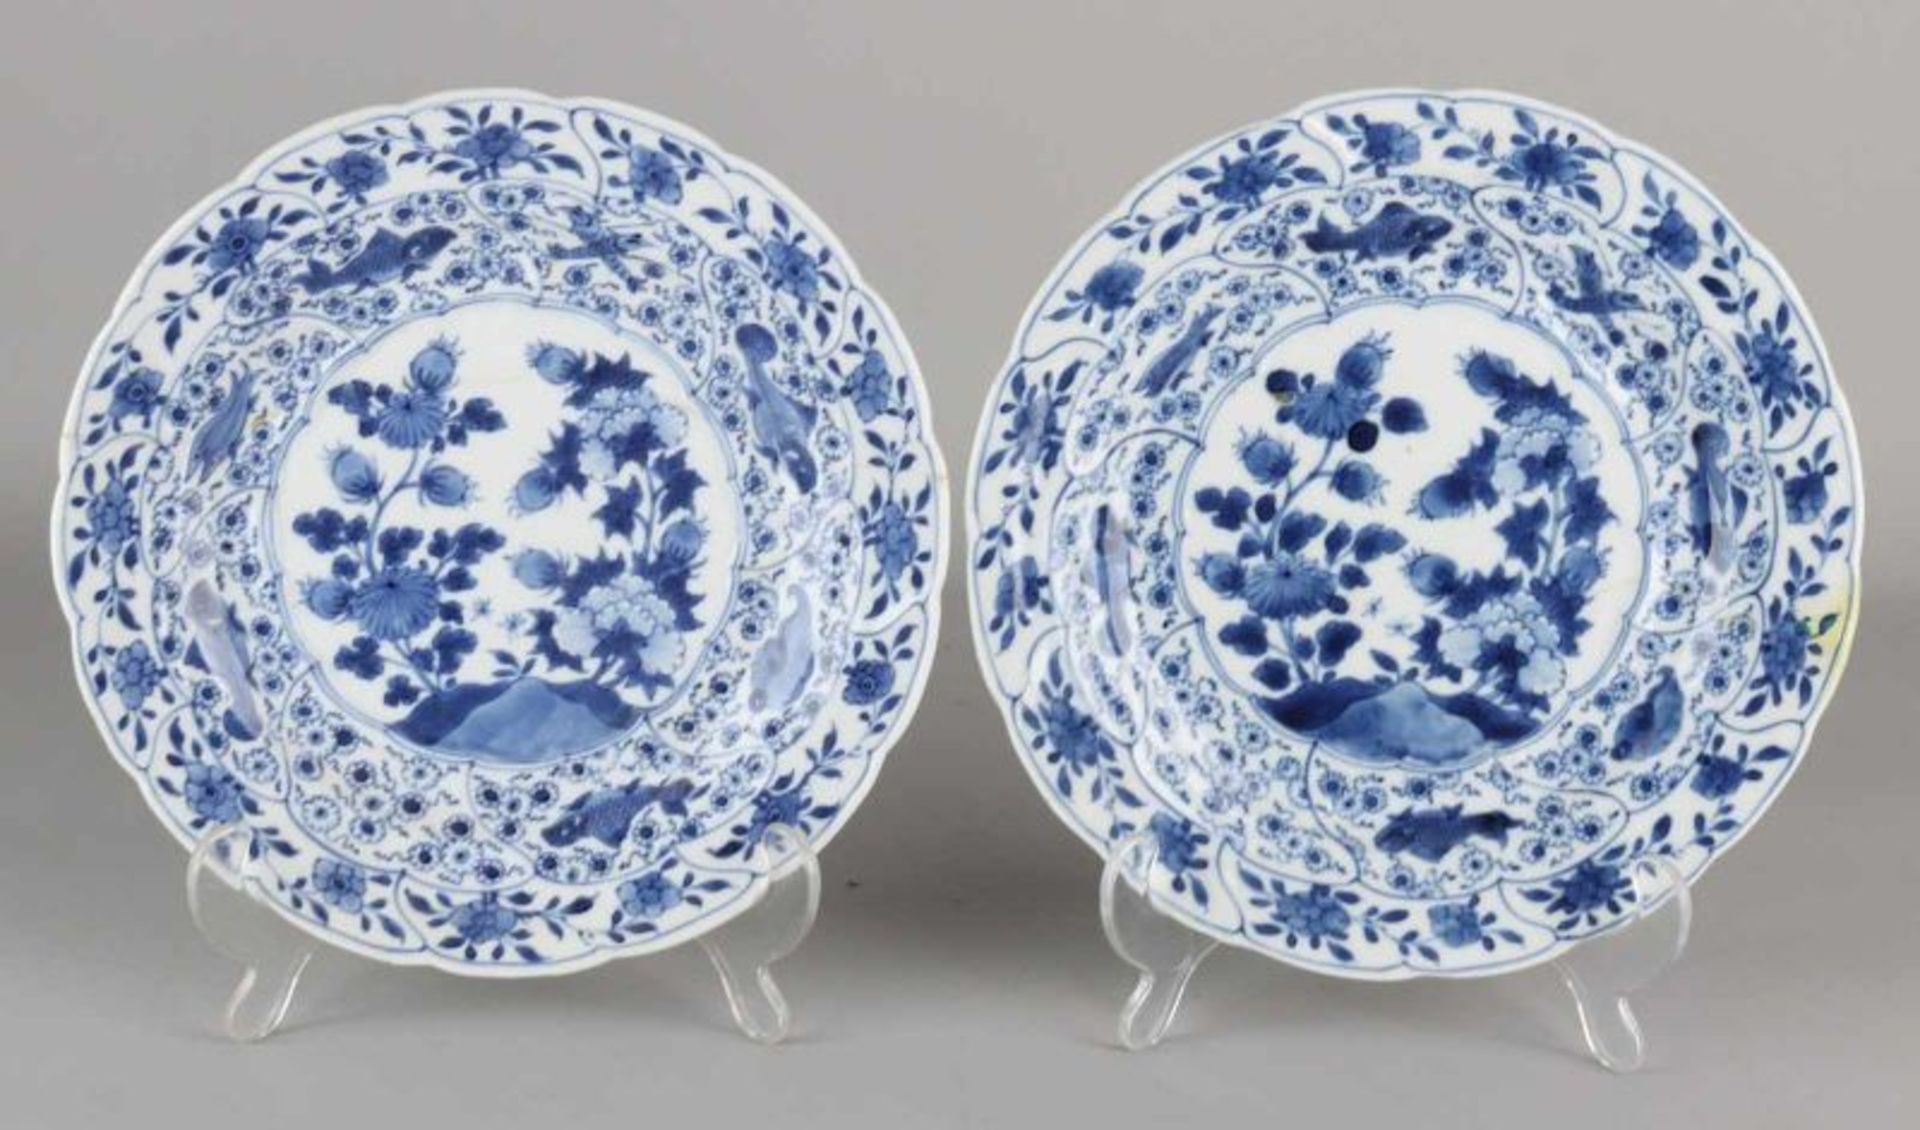 Two 18th century Kang ci Chinese porcelain plates molded with carp and garden decor. One sign